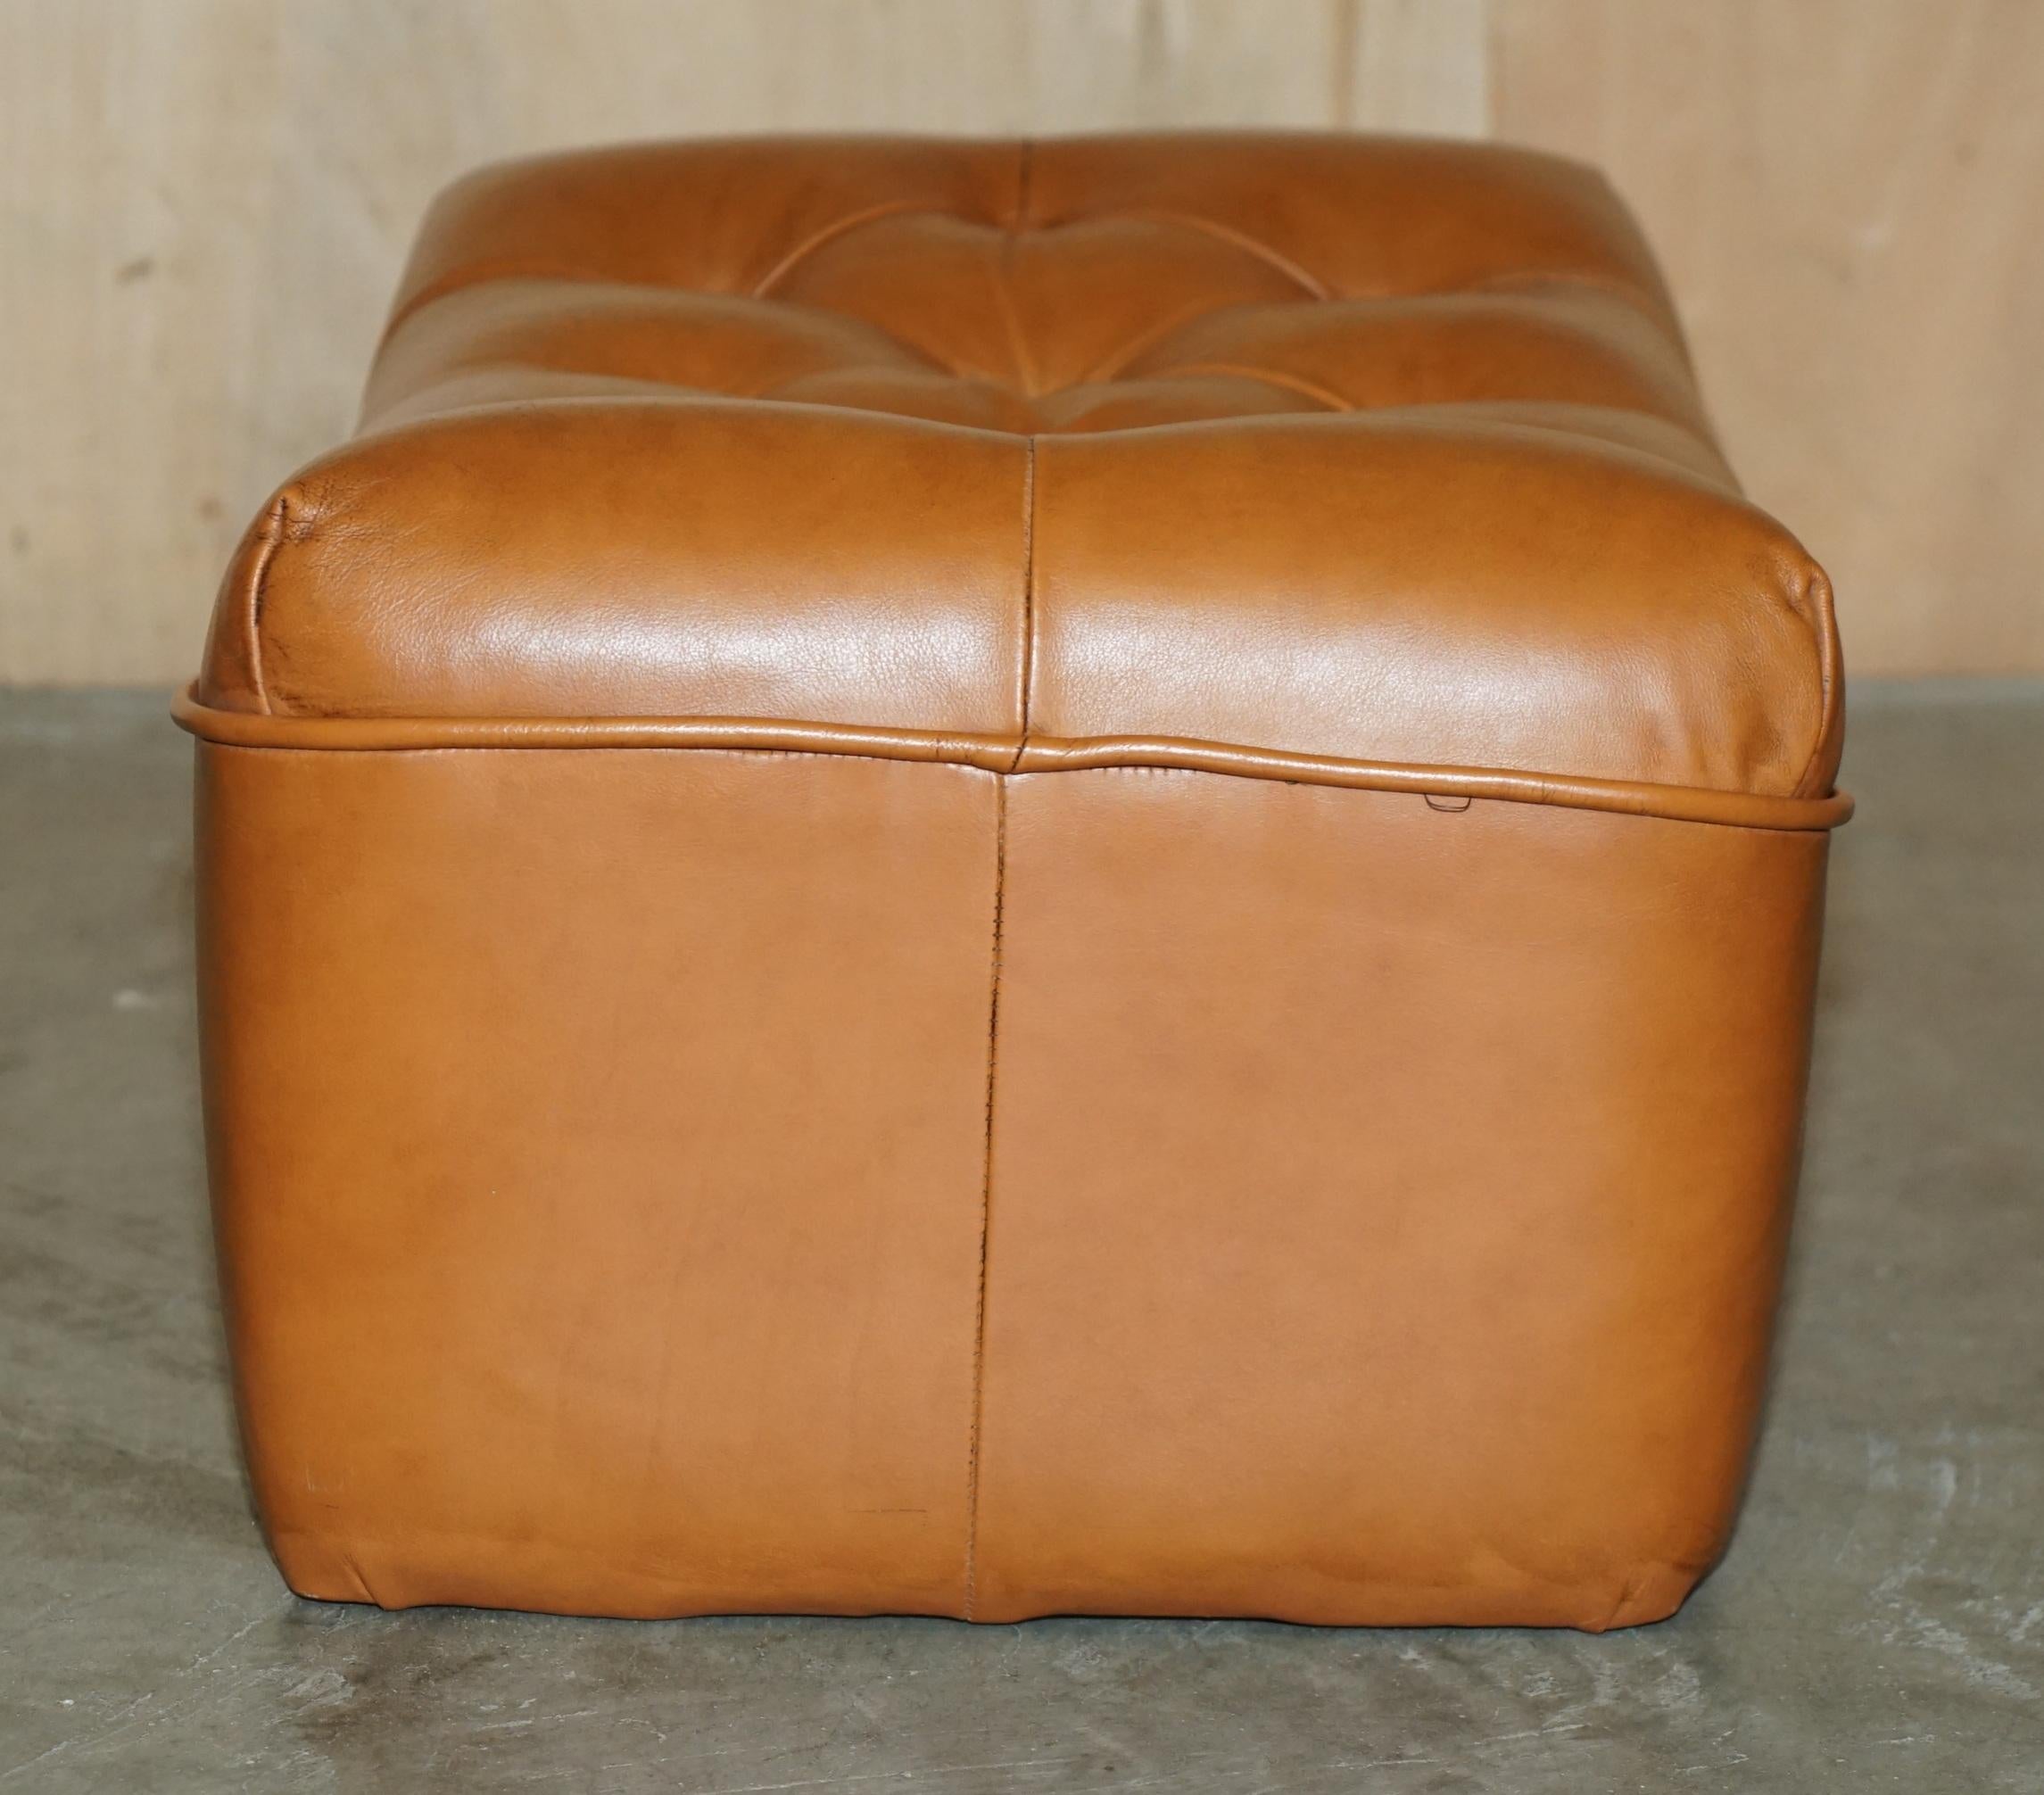 FINE VINTAGE MiD CENTURY MODERN TAN BROWN LEATHER CHESTERFIELD TUFTED FOOTSTOOL 2